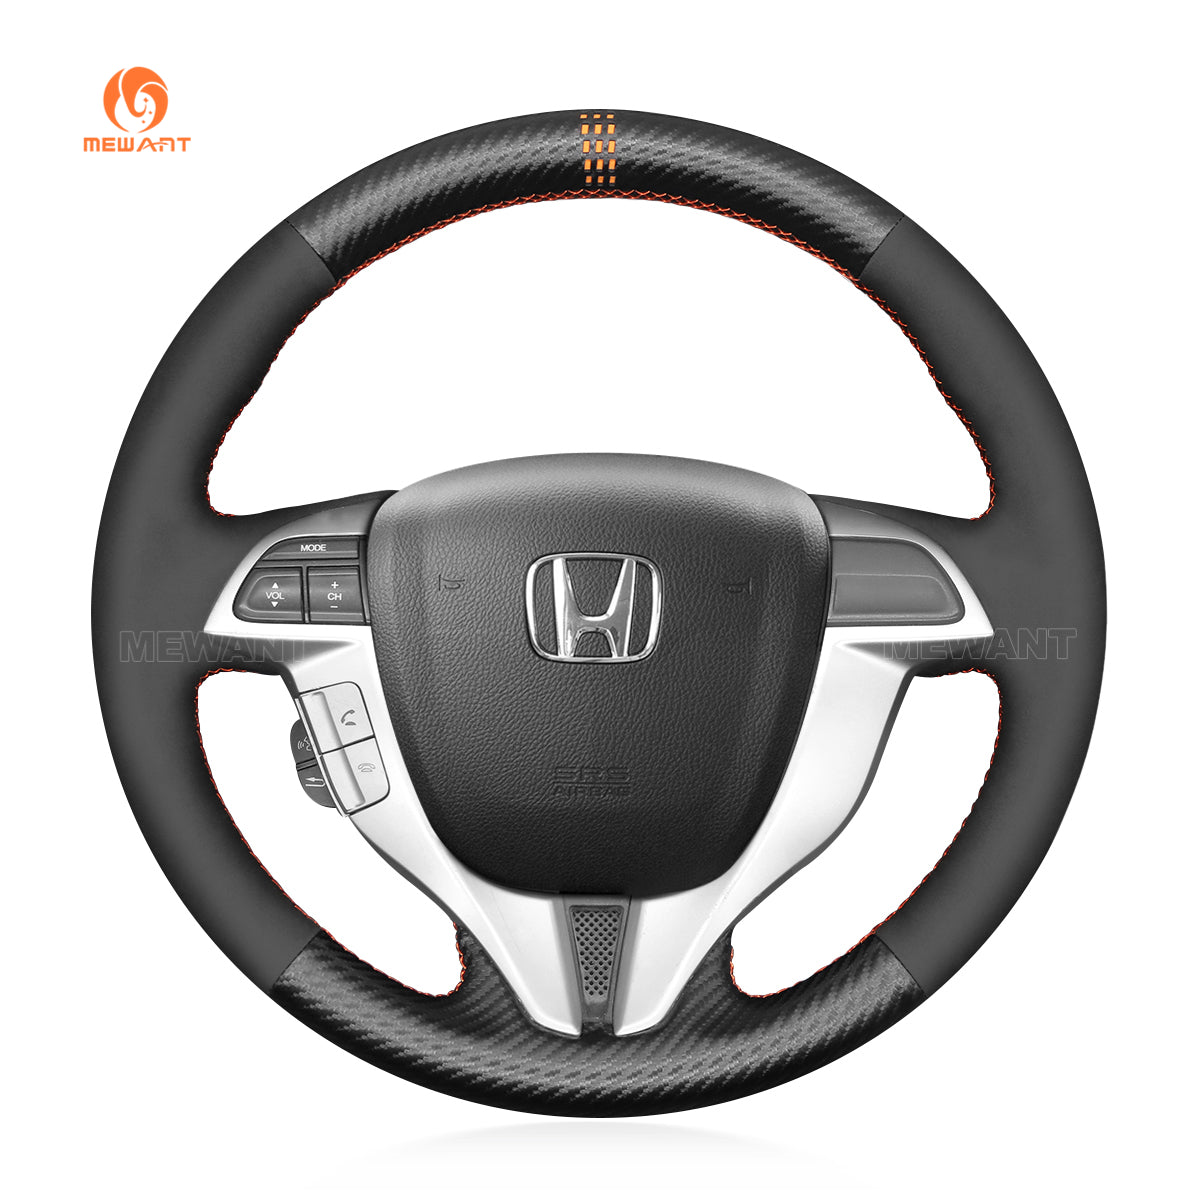 MEWANT Hand Stitch Black Leather Car Steering Wheel  Cover for Honda Accord Coupe 8 2008-2012 / Accord Crosstour 2010-2012